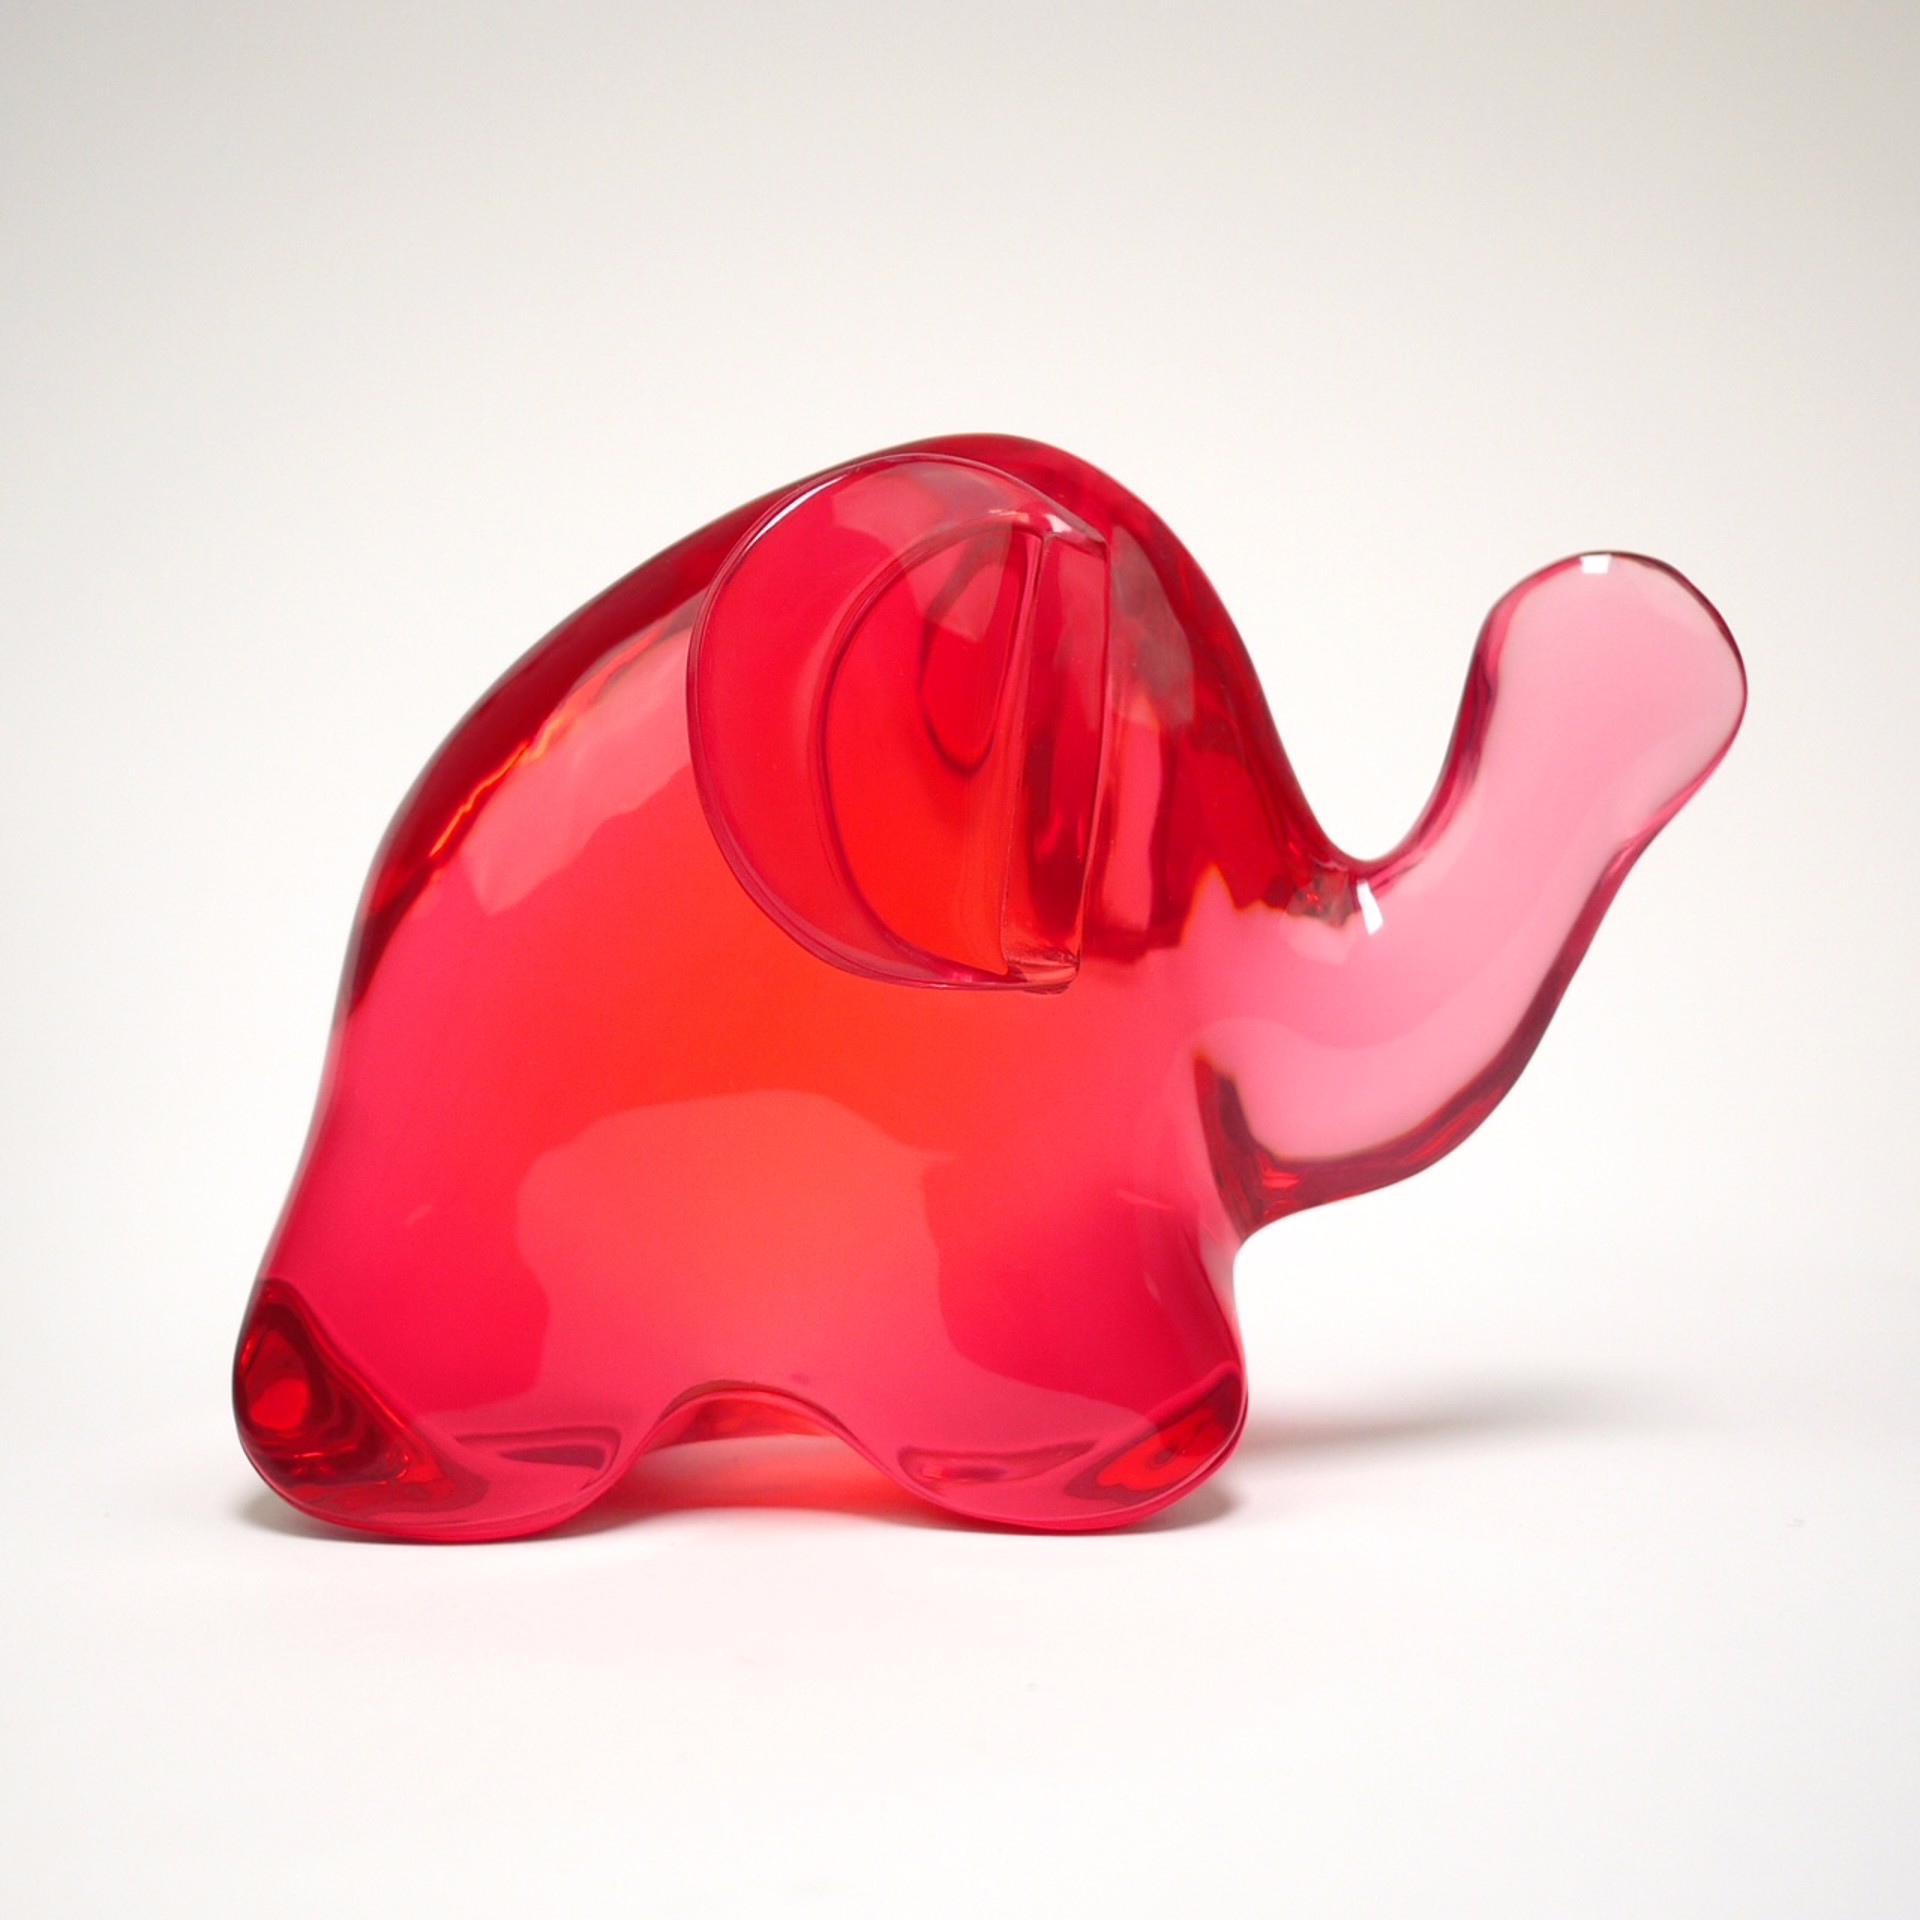 Lucky Elephant (pink) by Christopher Schulz